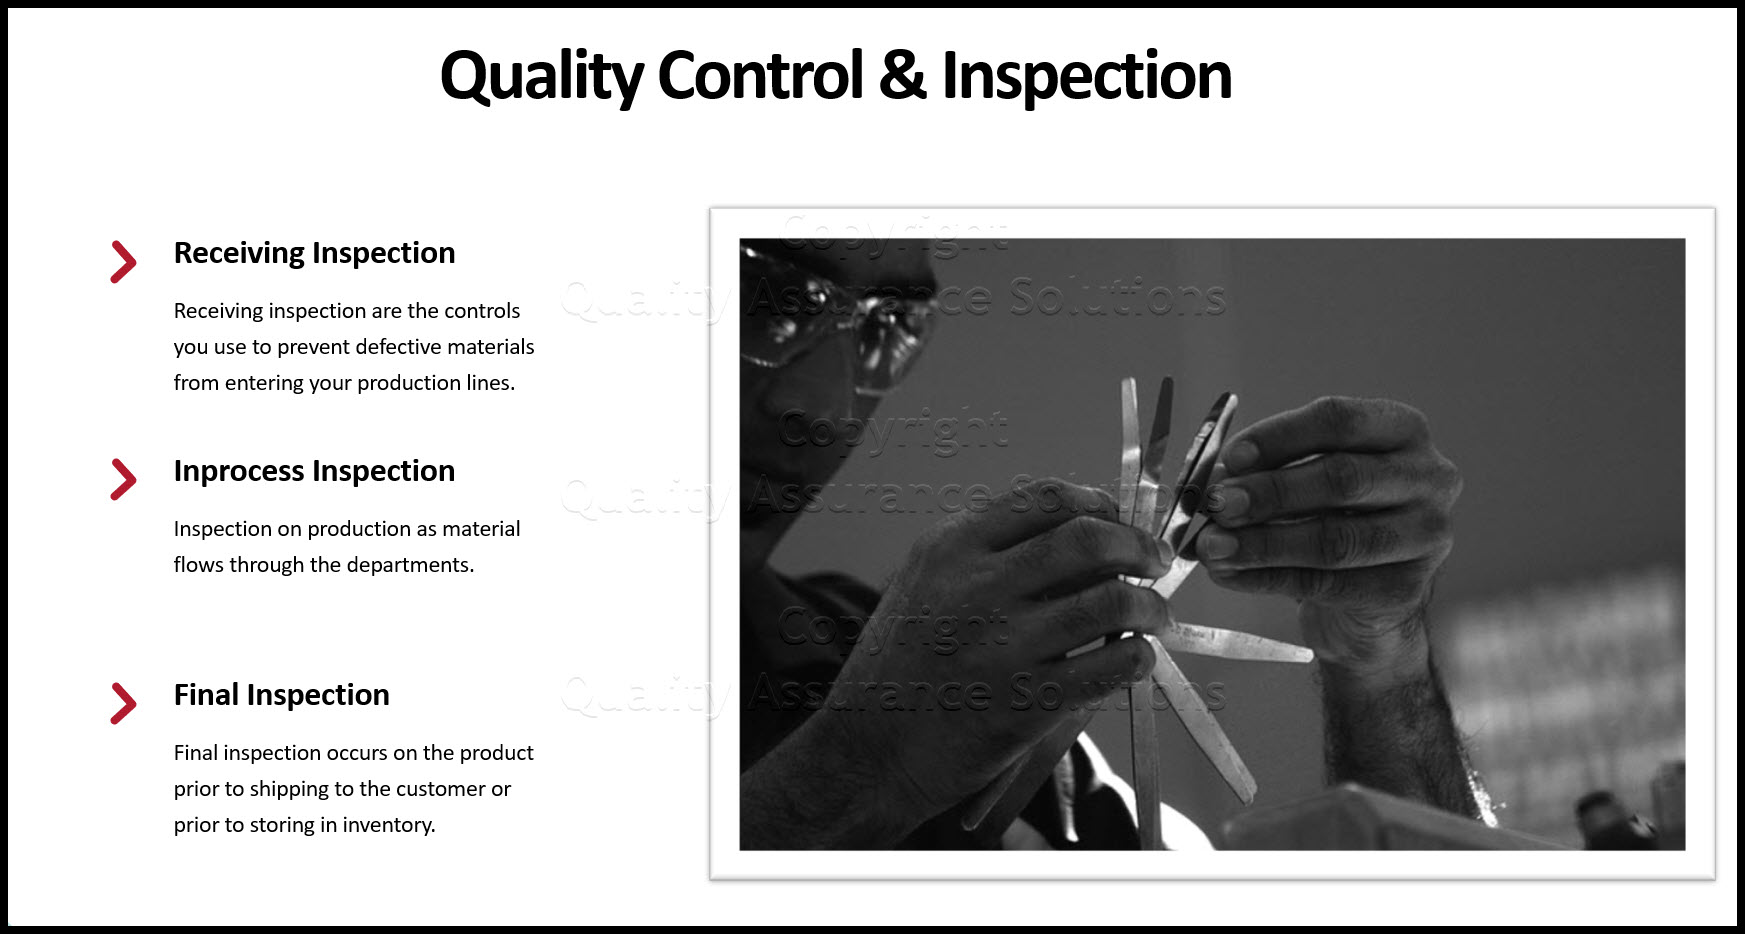 This page answers What is Quality Control.  It covers receiving, inprocess and final inspection